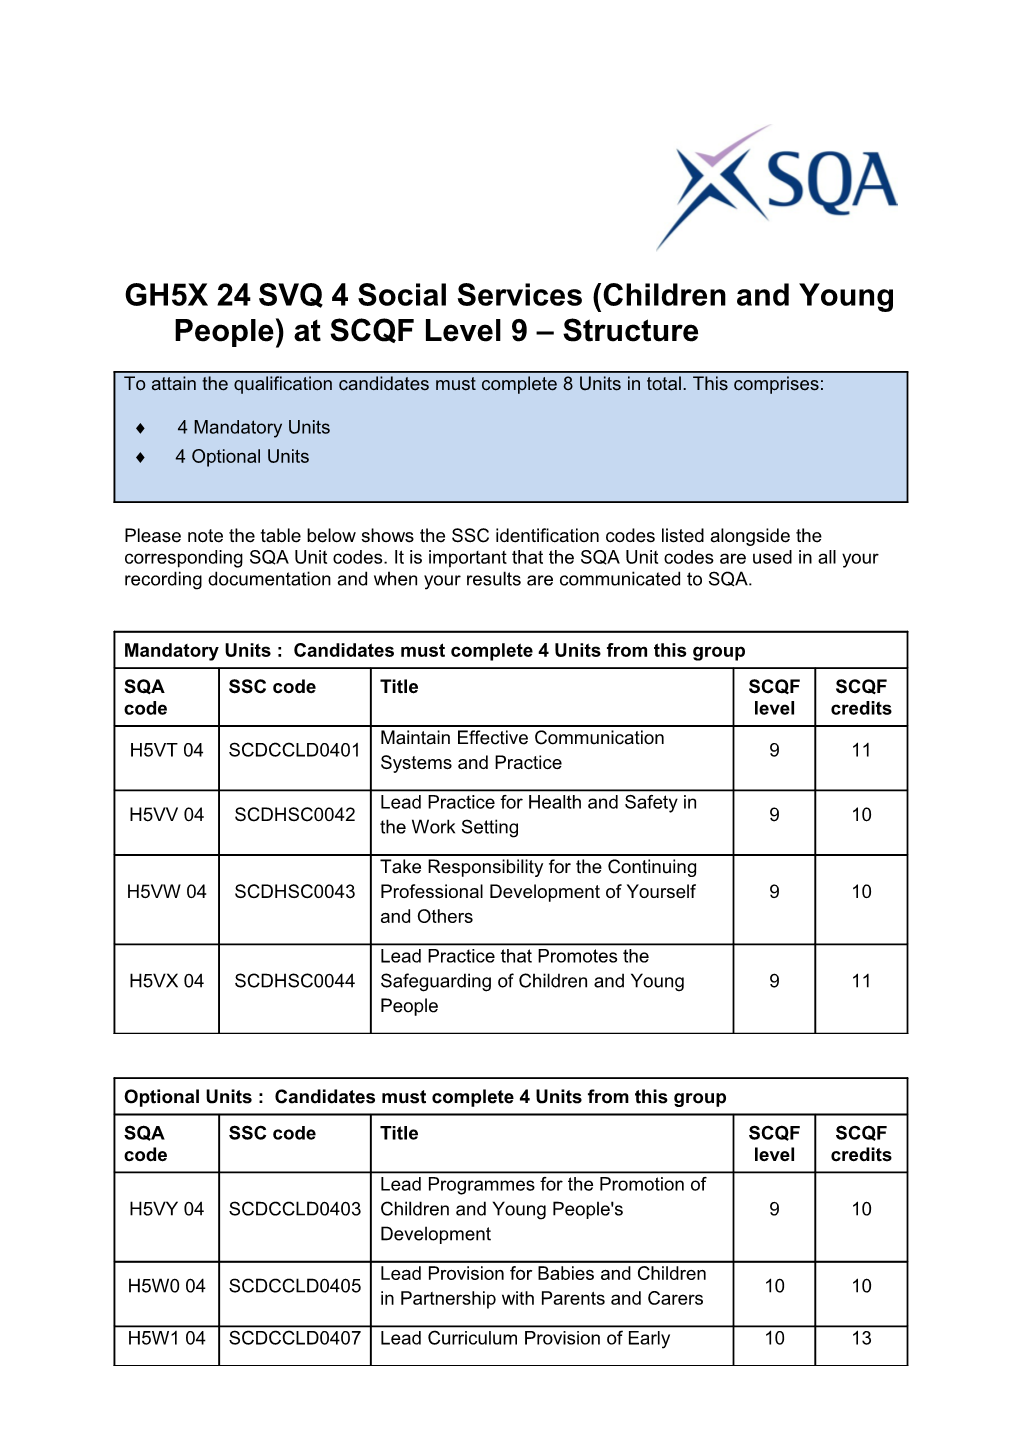 GH5X 24SVQ 4 Social Services (Children and Young People) at SCQF Level 9 Structure